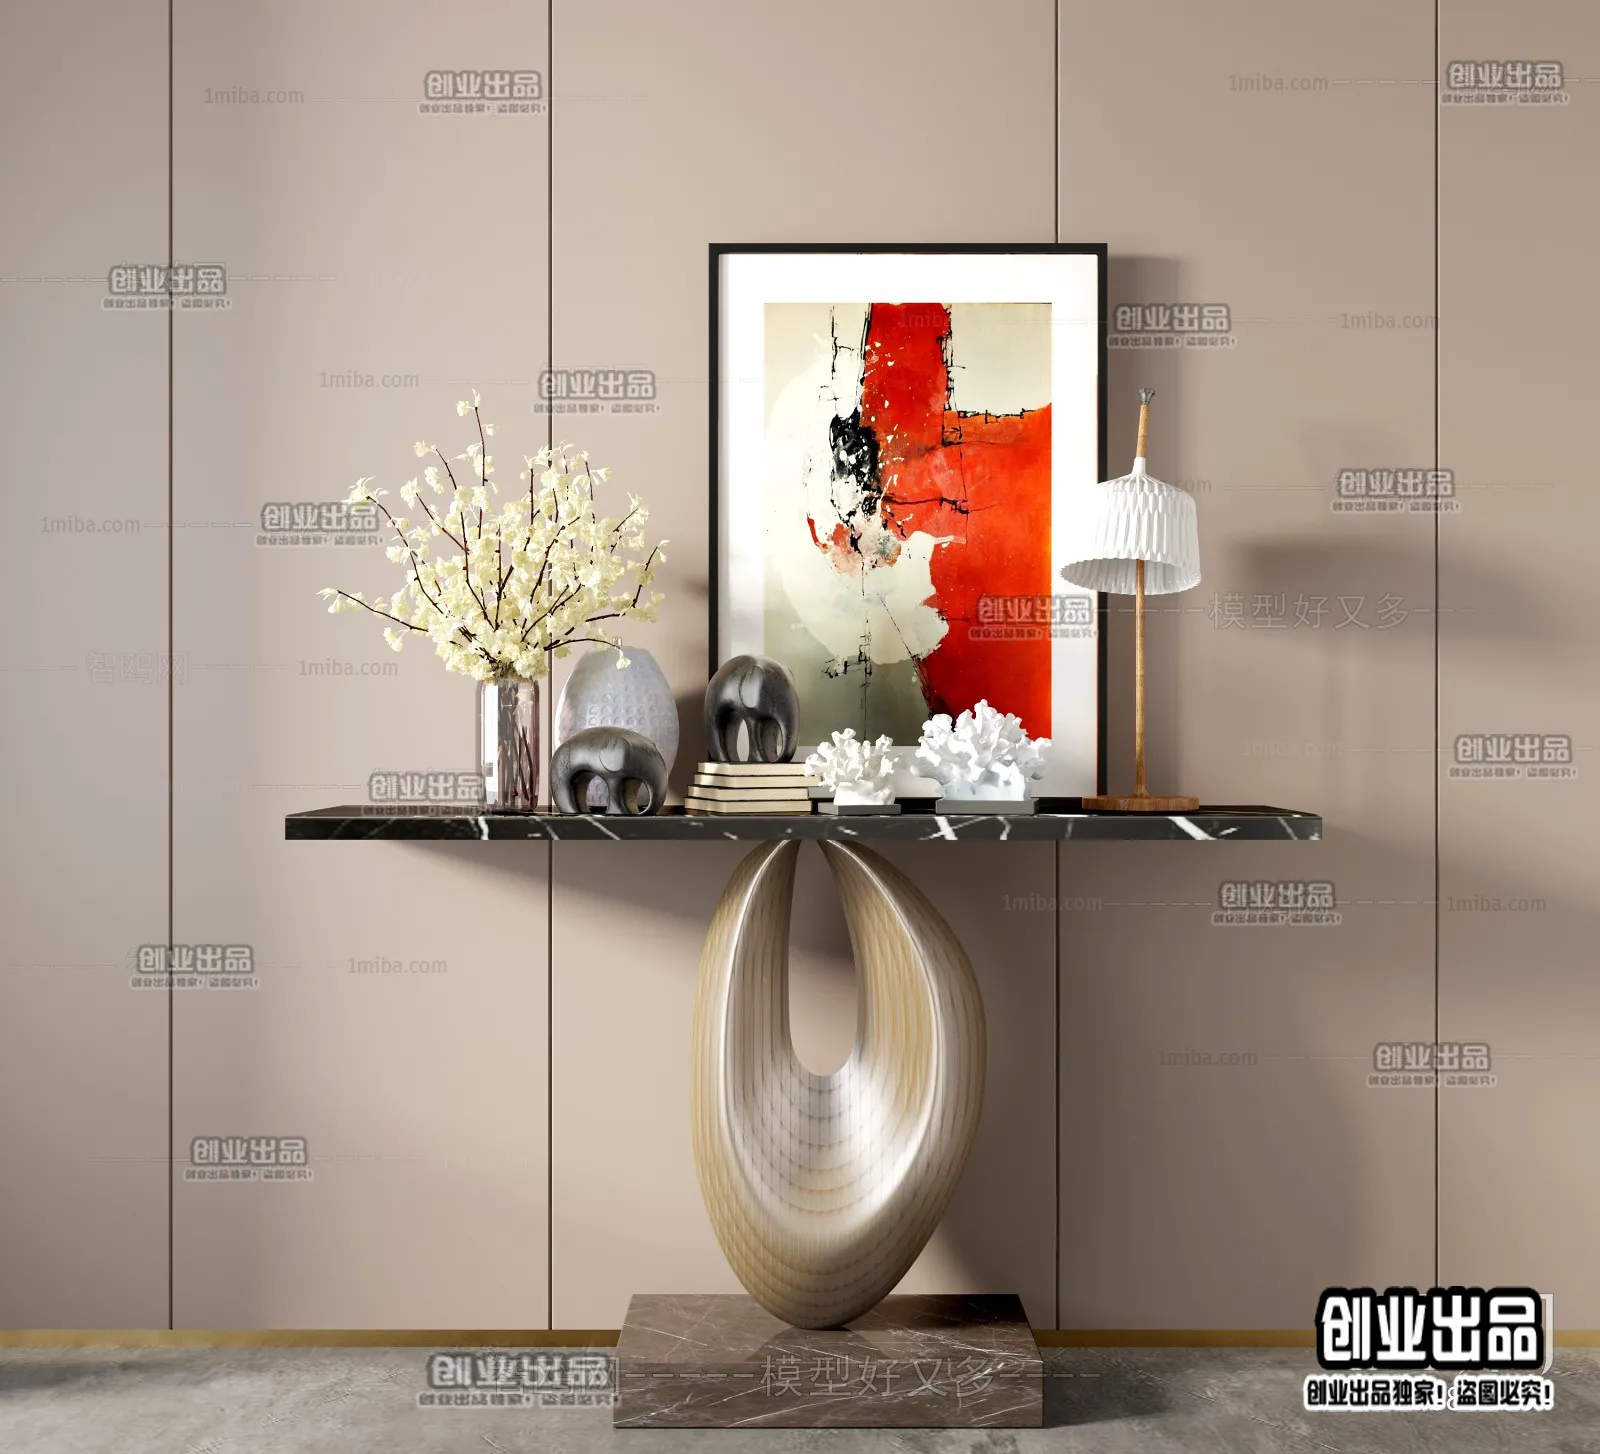 CONSOLE TABLE – 32 – FURNITURE 3D MODELS 2022 (VRAY)